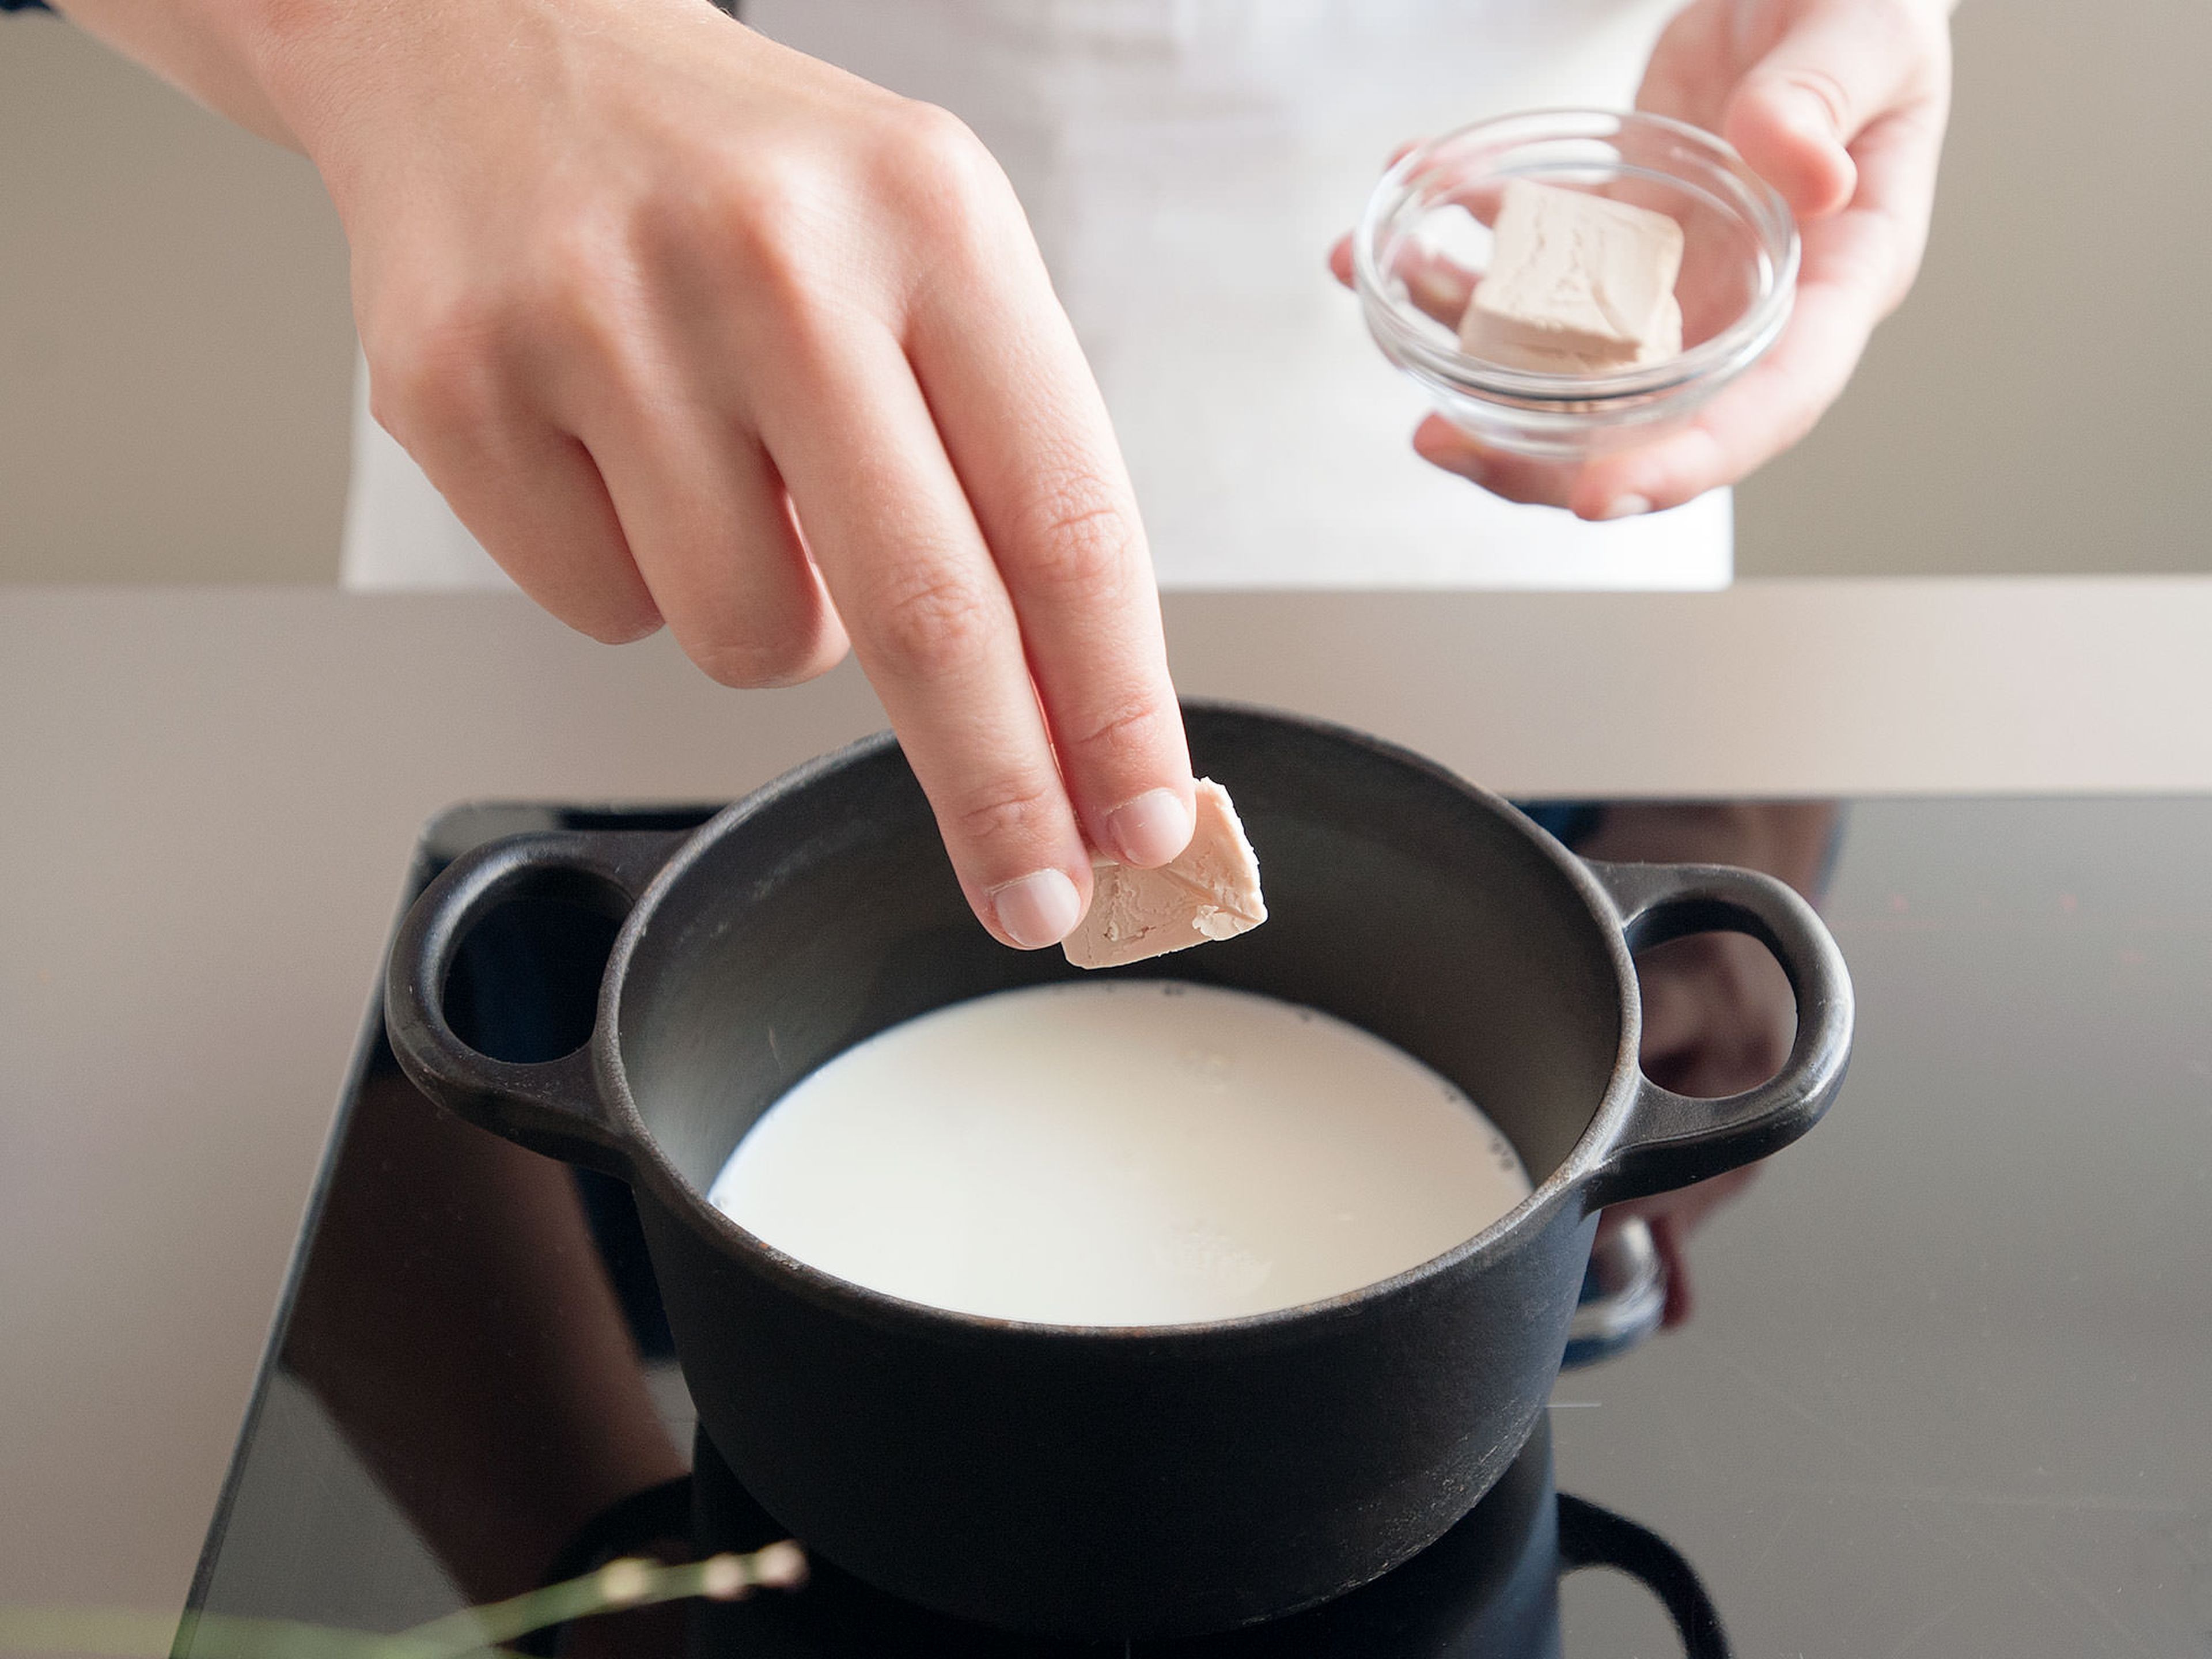 Heat milk in a small saucepan on low heat until lukewarm, then crumble yeast over it and add a pinch of sugar. Stir until yeast is dissolved, then cover and set aside until milk turns foamy, approx. 5 minutes.